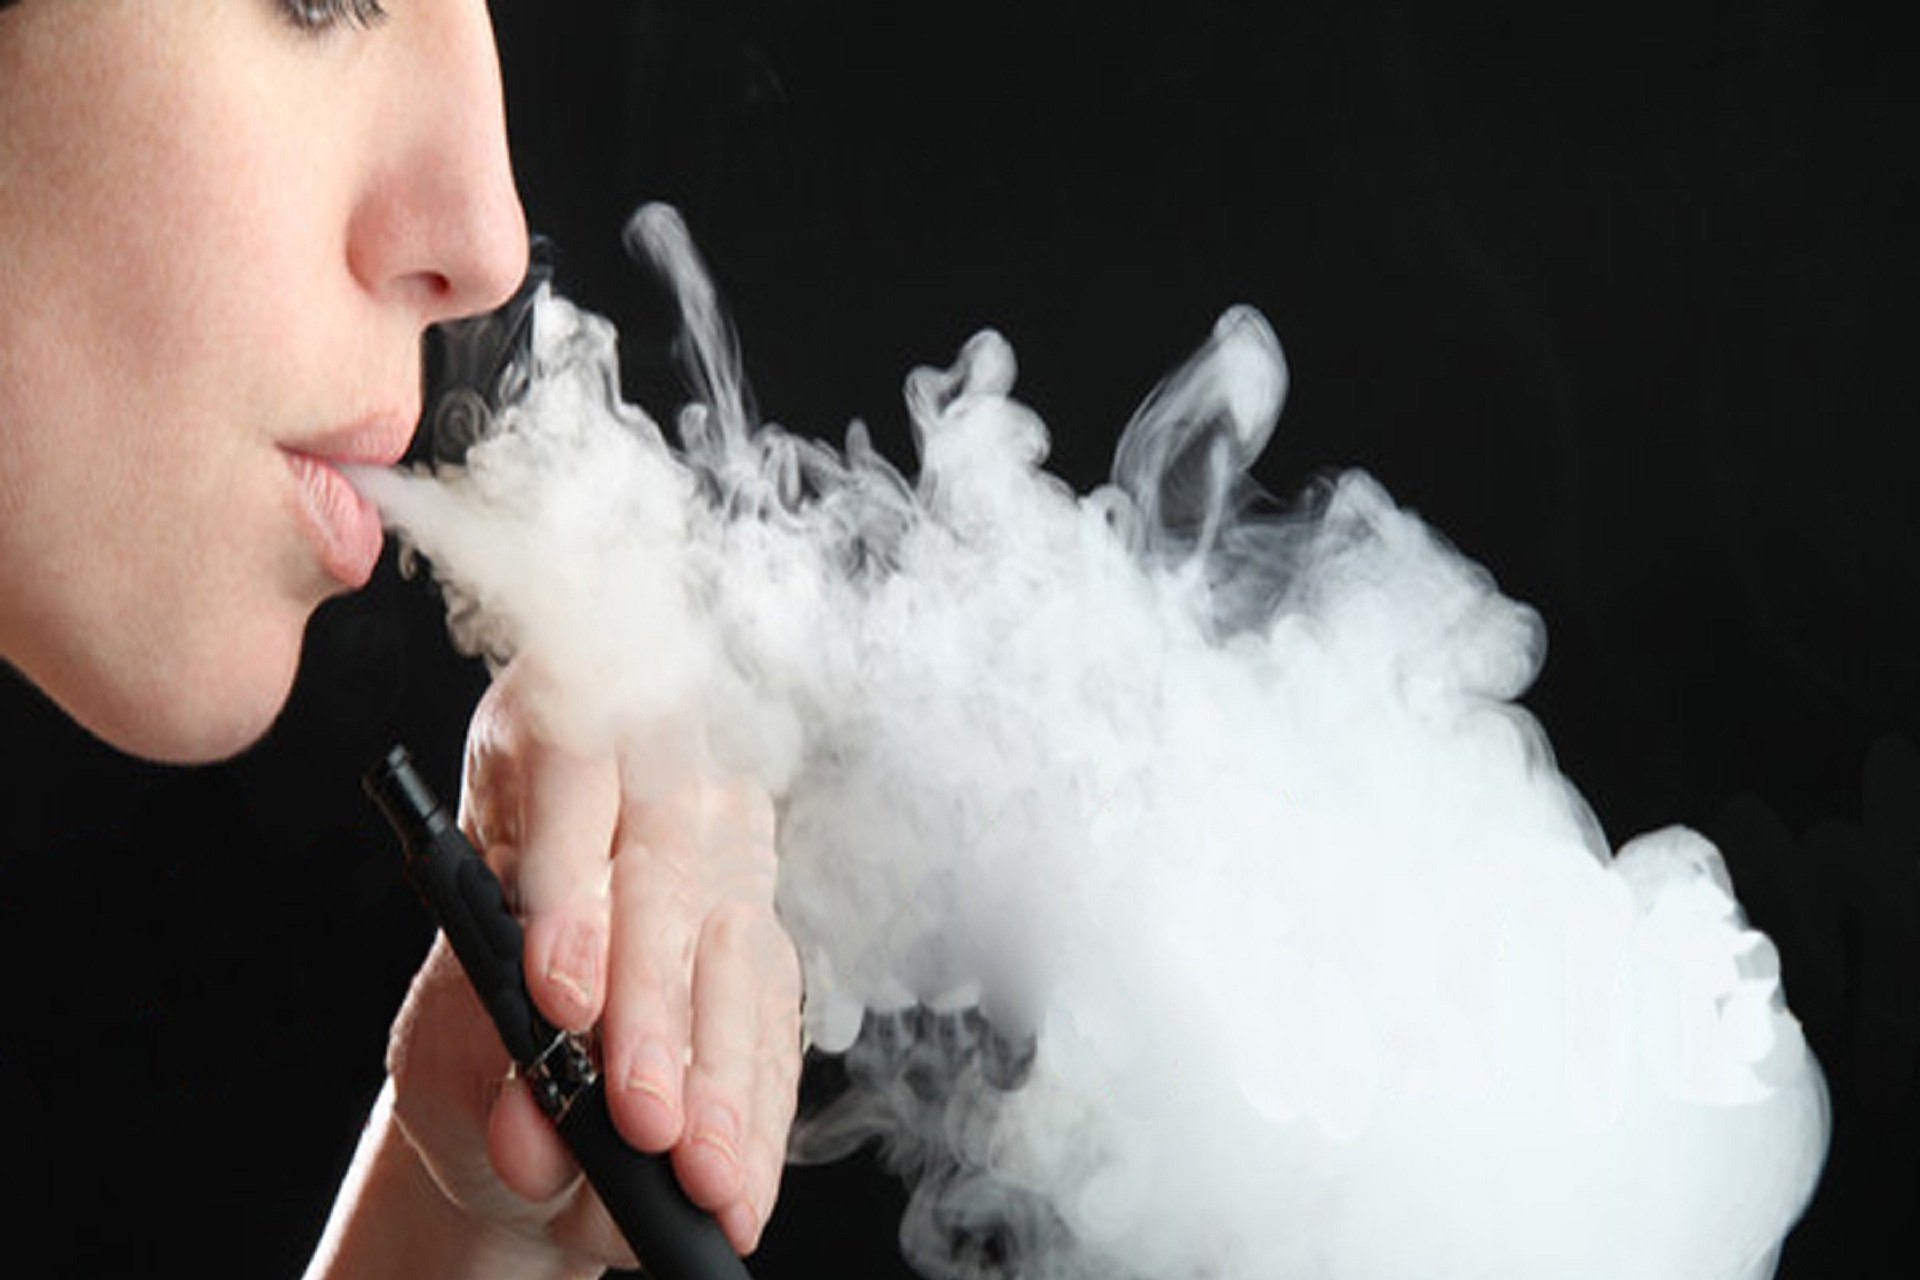 Can you get second hand smoke from a vape?